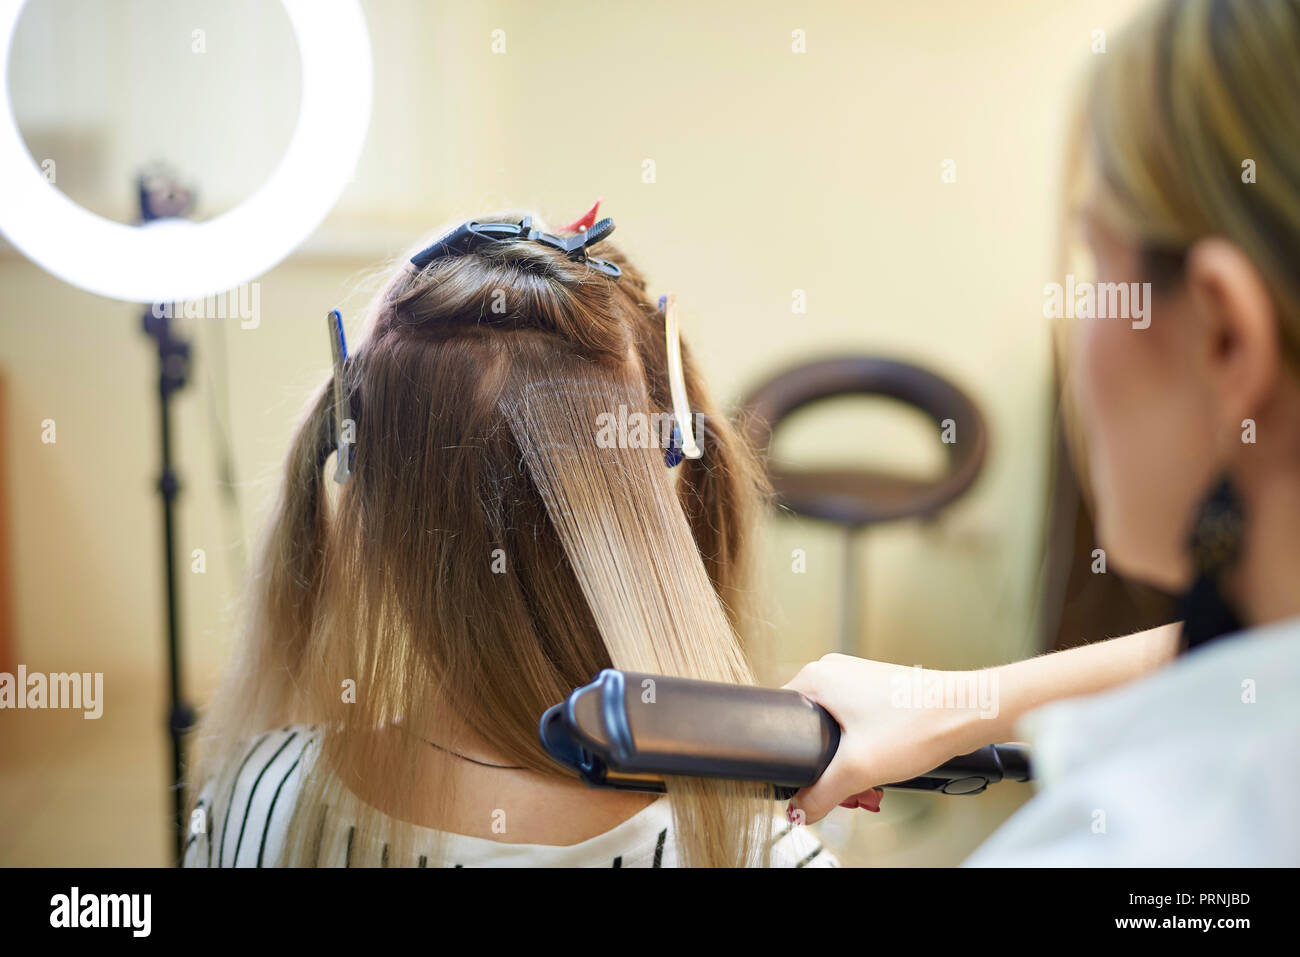 Hairdressing services. Hair styling process in a beauty salon. Stock Photo